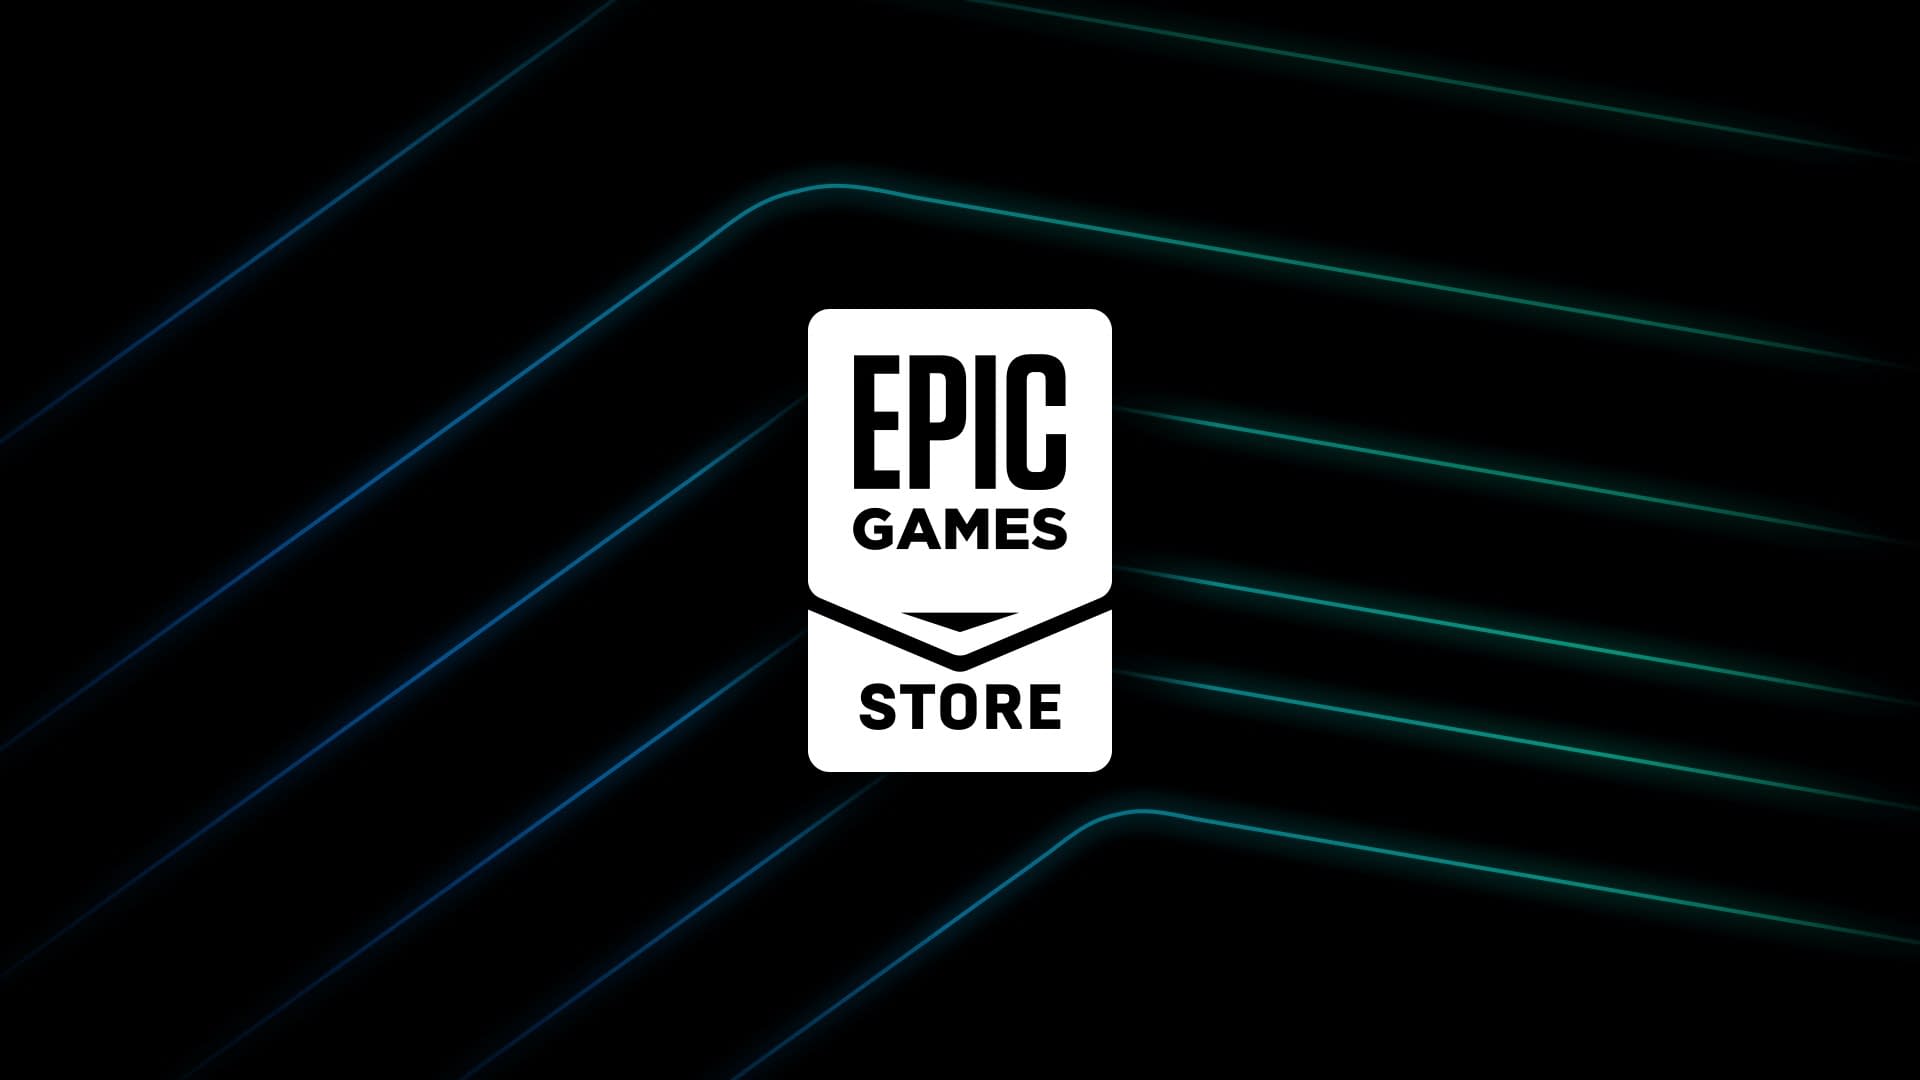 Epic Games Will Reportedly Distribute Free Games Every Day at the End of the Year